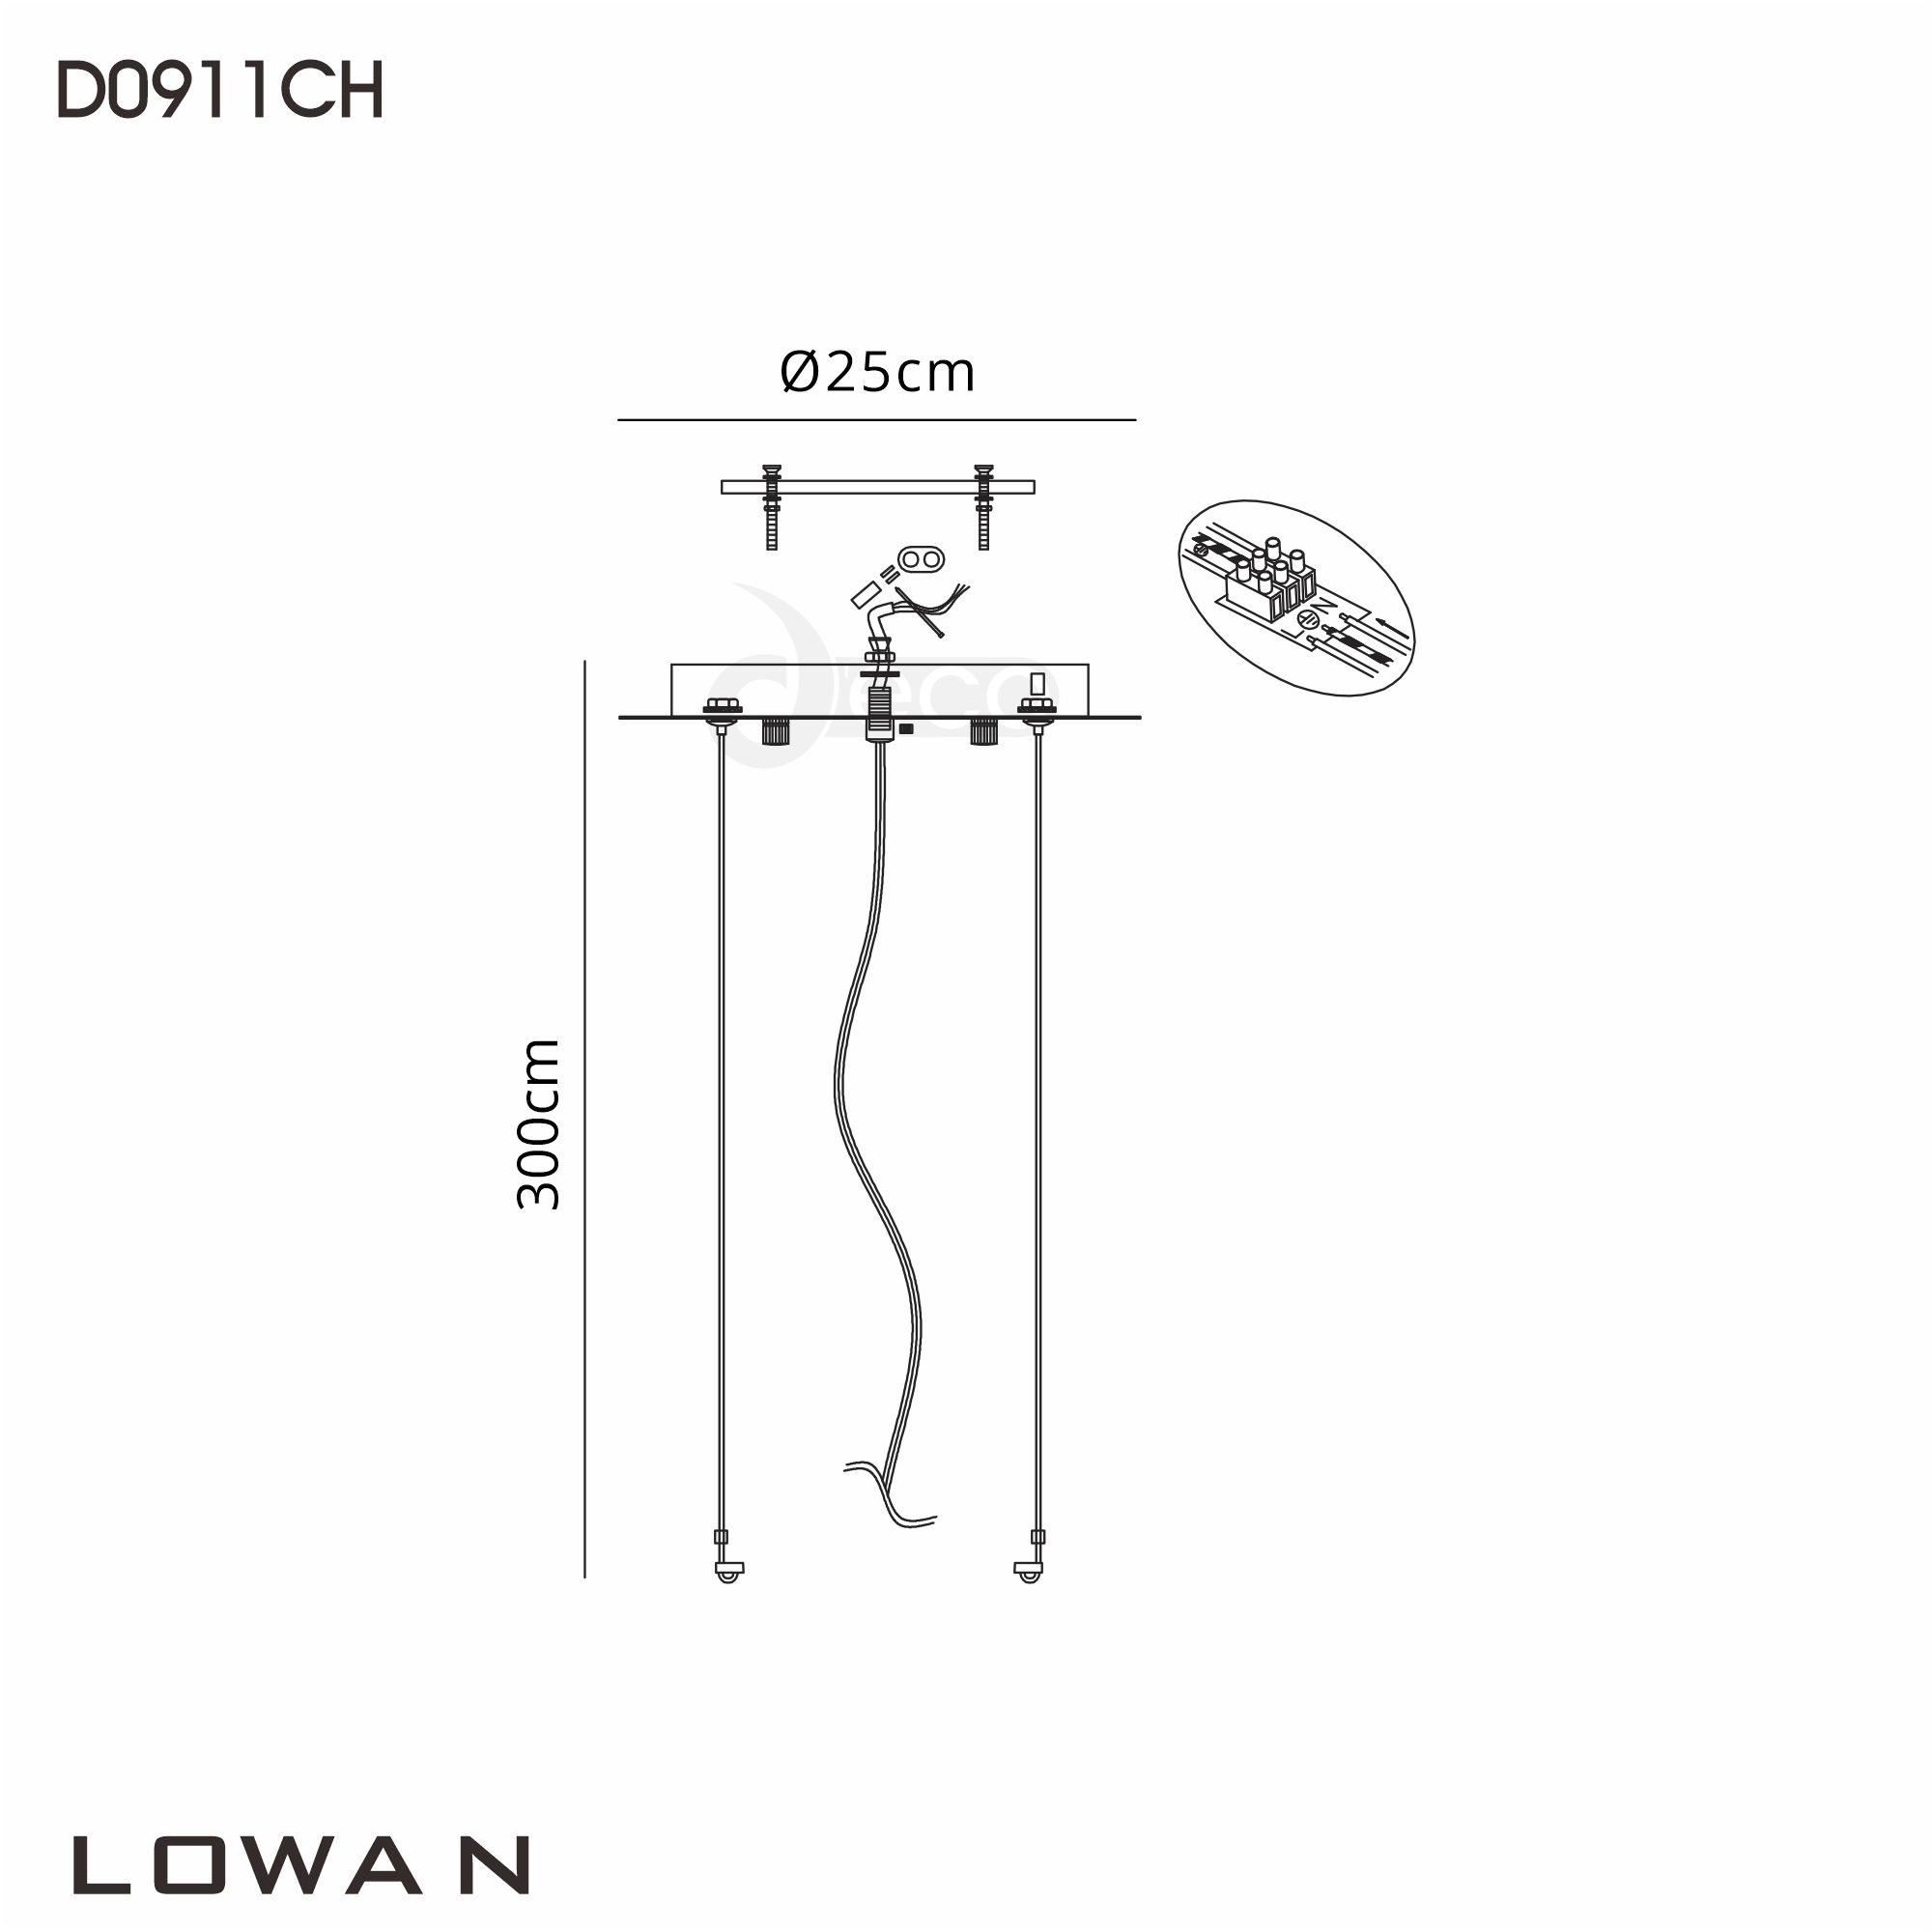 D0930CH/SI  Lowan 890mm, 3m Suspension Plate c/w Power Cable To Lower Flush Fittings, Polished Chrome/Silver Max Load 20kg (ONLY TESTED FOR OUR RANGE OF PRODUCTS)